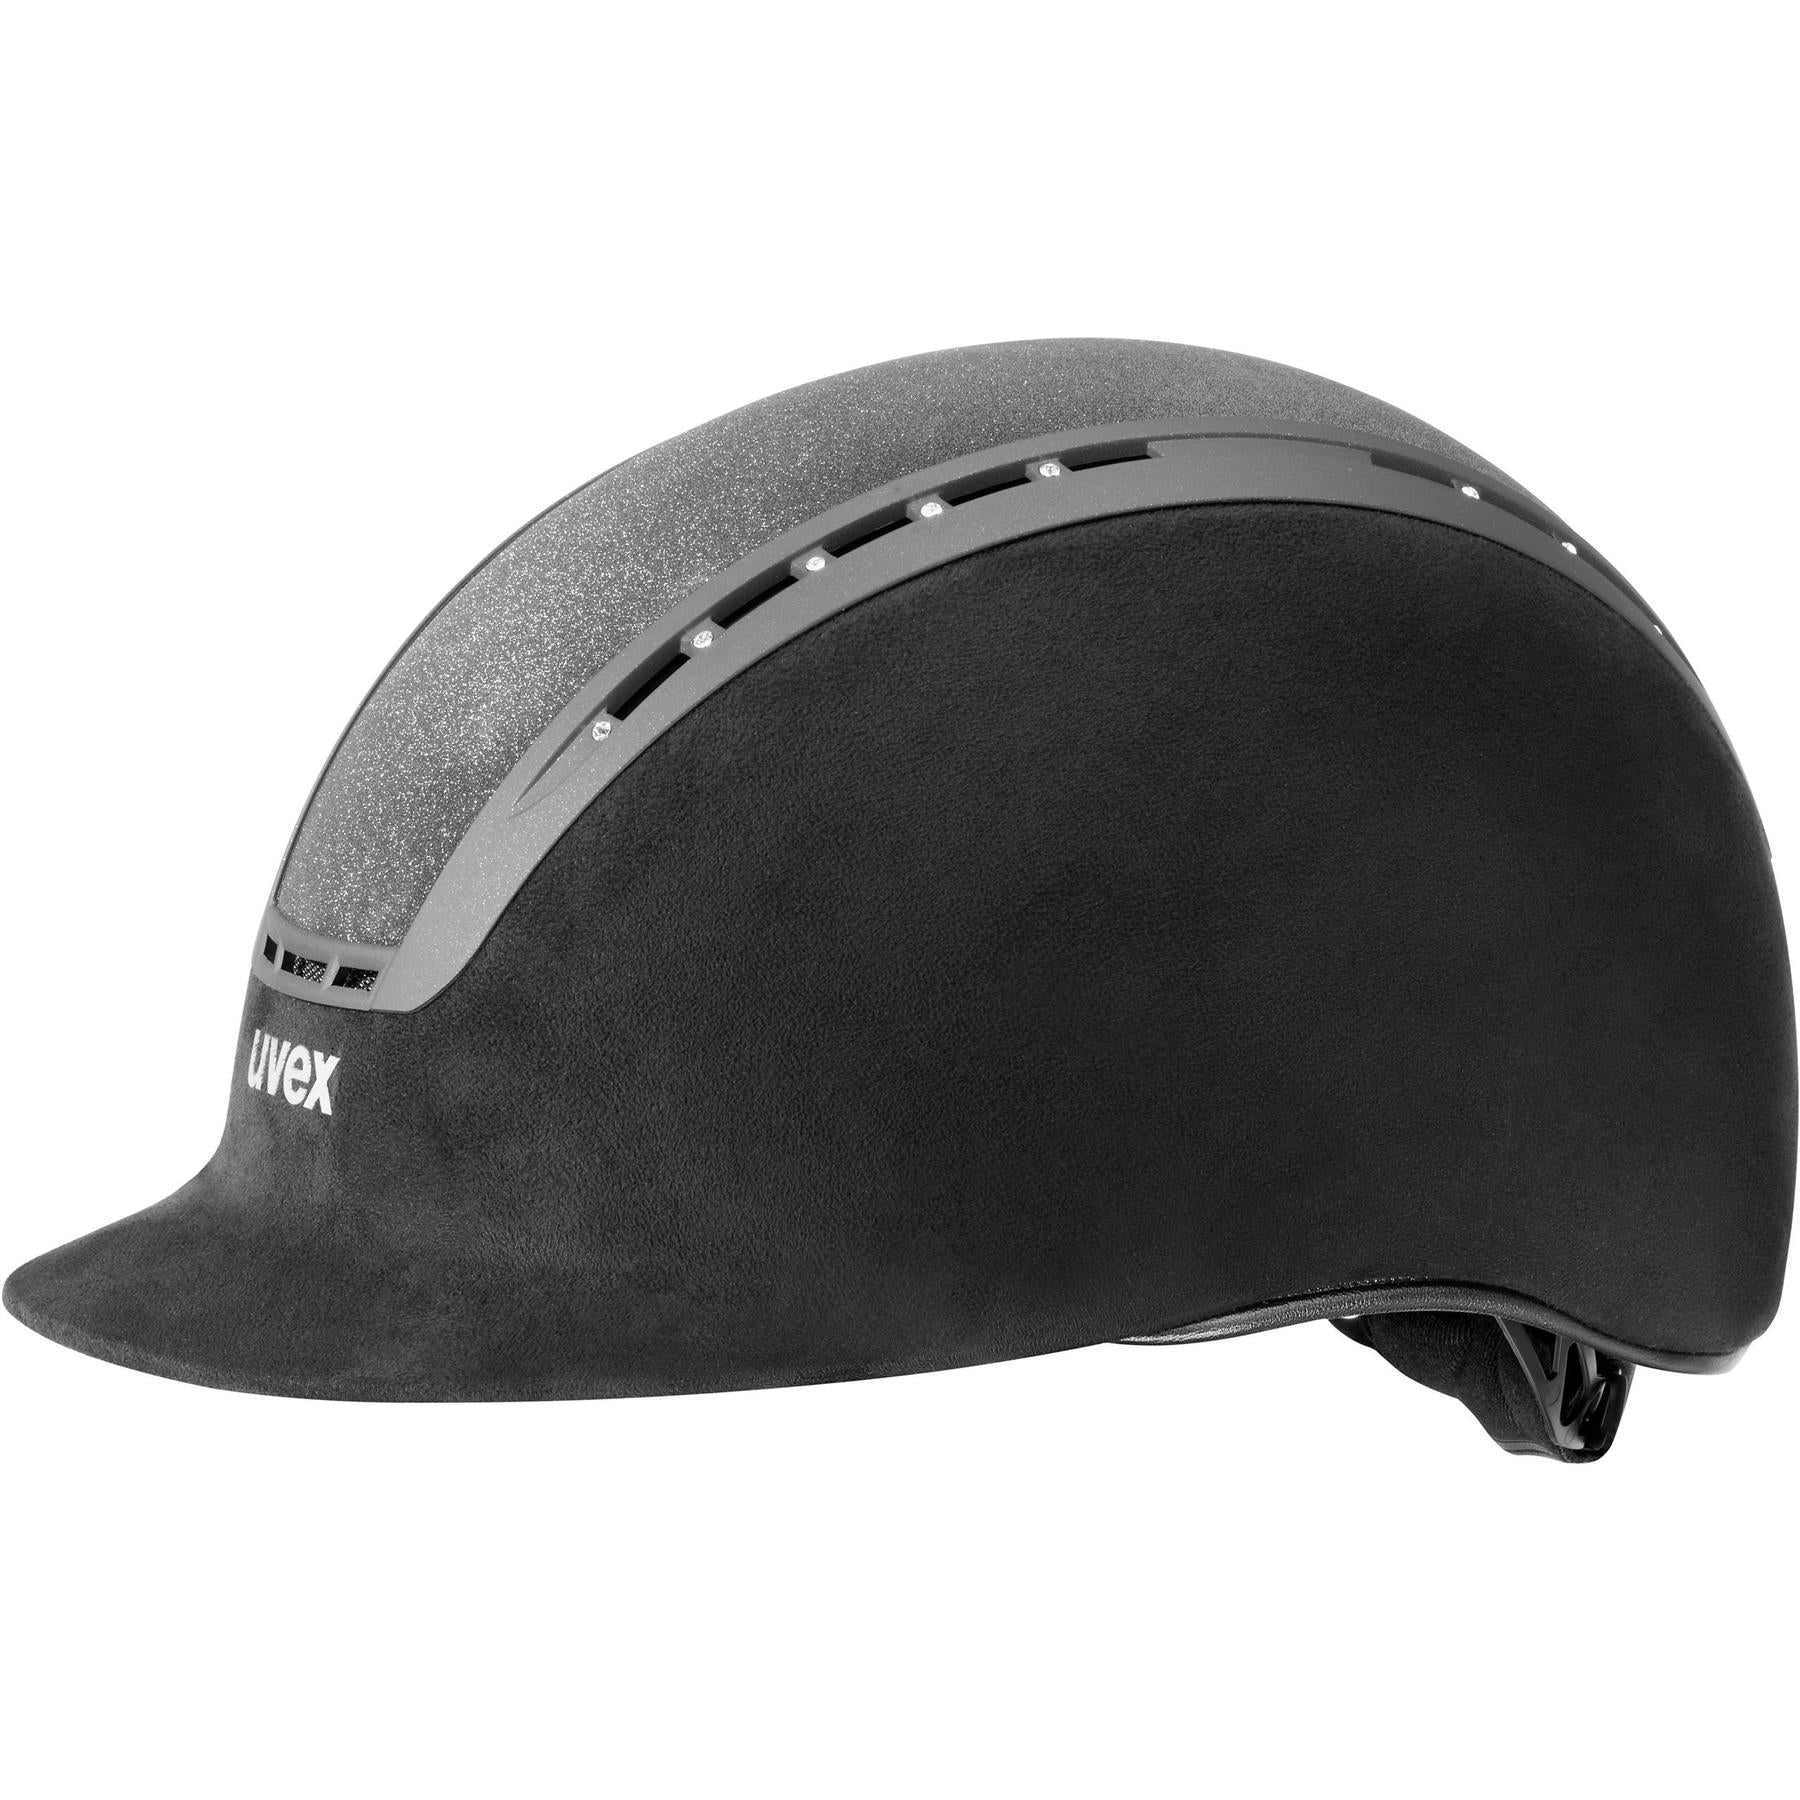 Uvex Suxxeed Glamour Hat - Just Horse Riders